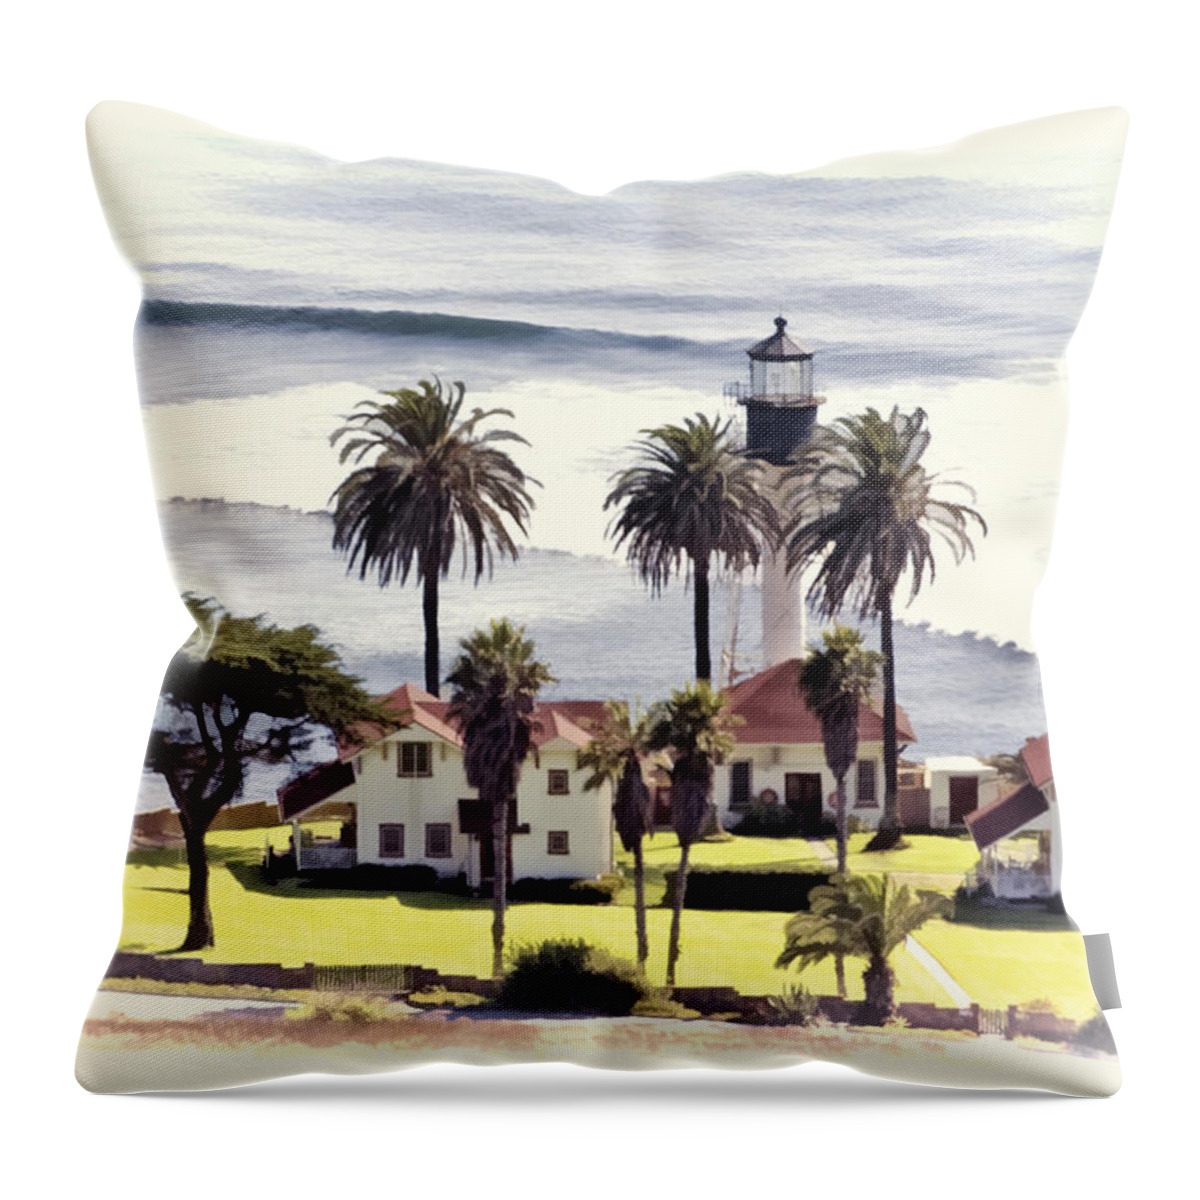 San Diego Throw Pillow featuring the photograph New Point Loma Lighthouse by Claude LeTien